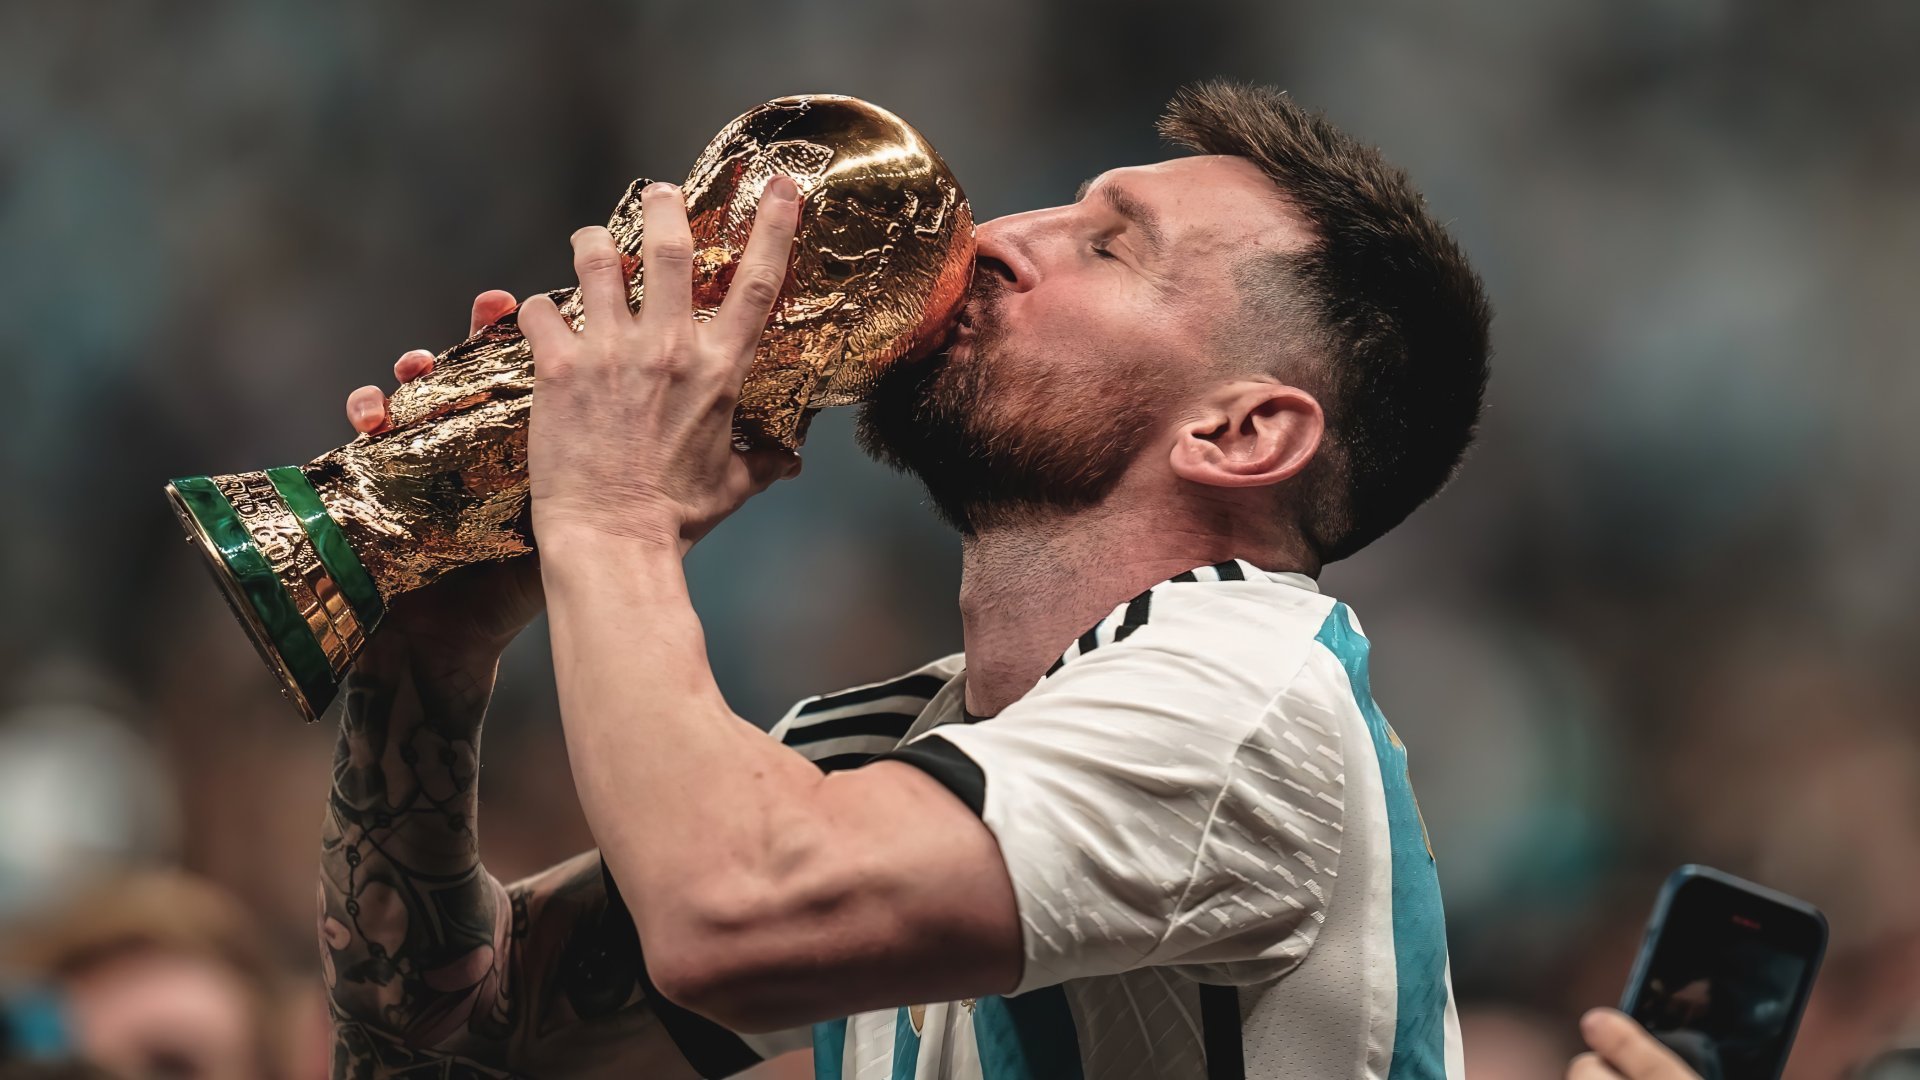 Lionel Messi with trophy FIFA World Cup Wallpaper 4k Ultra HD ID:11267